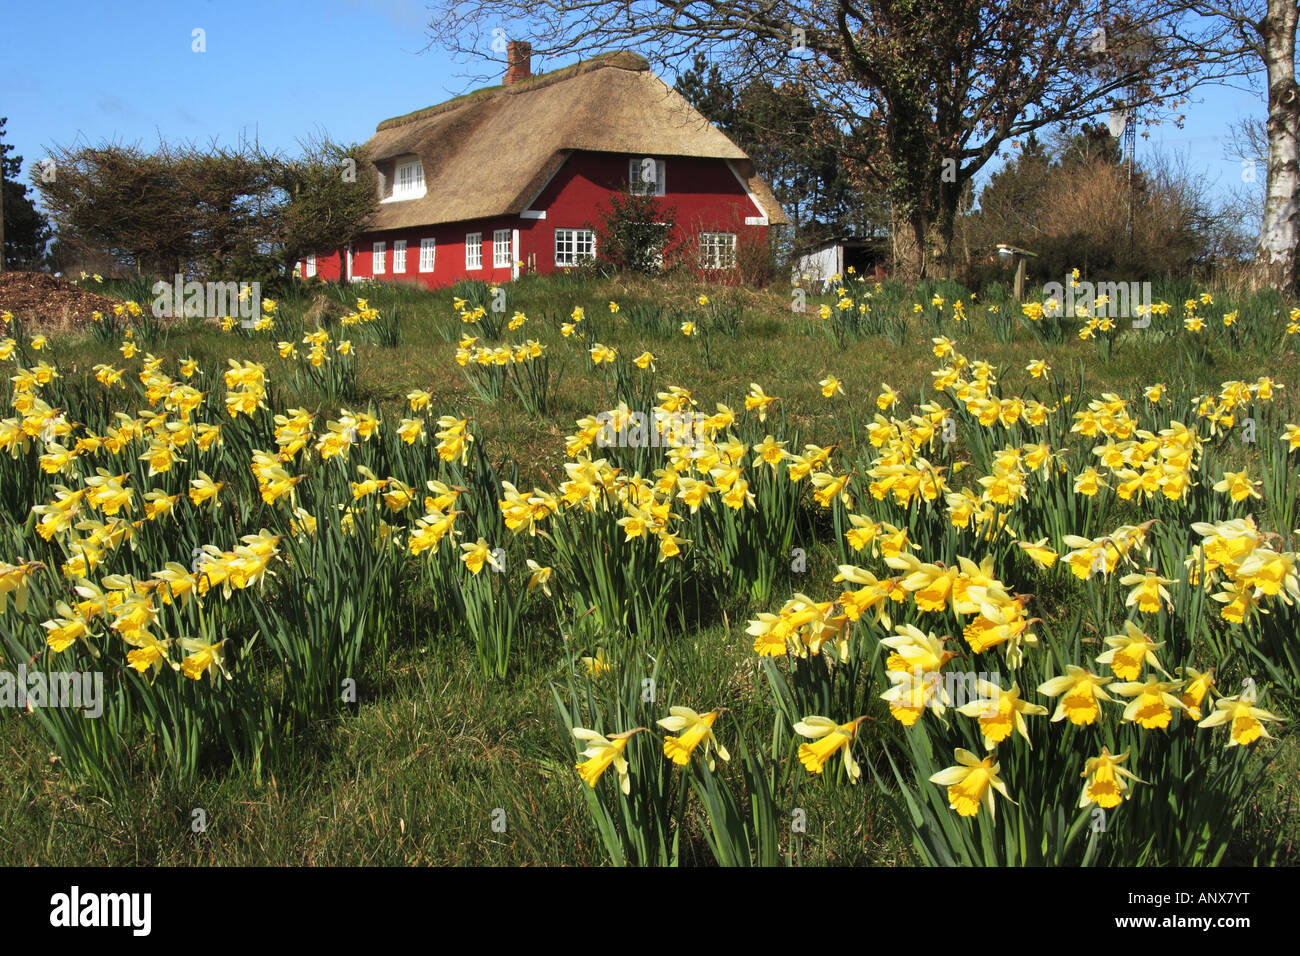 daffodil (Narcissus spec.), maedow with narcissus in front of a red house with thatched roof, Denmark, Roemoe Stock Photo